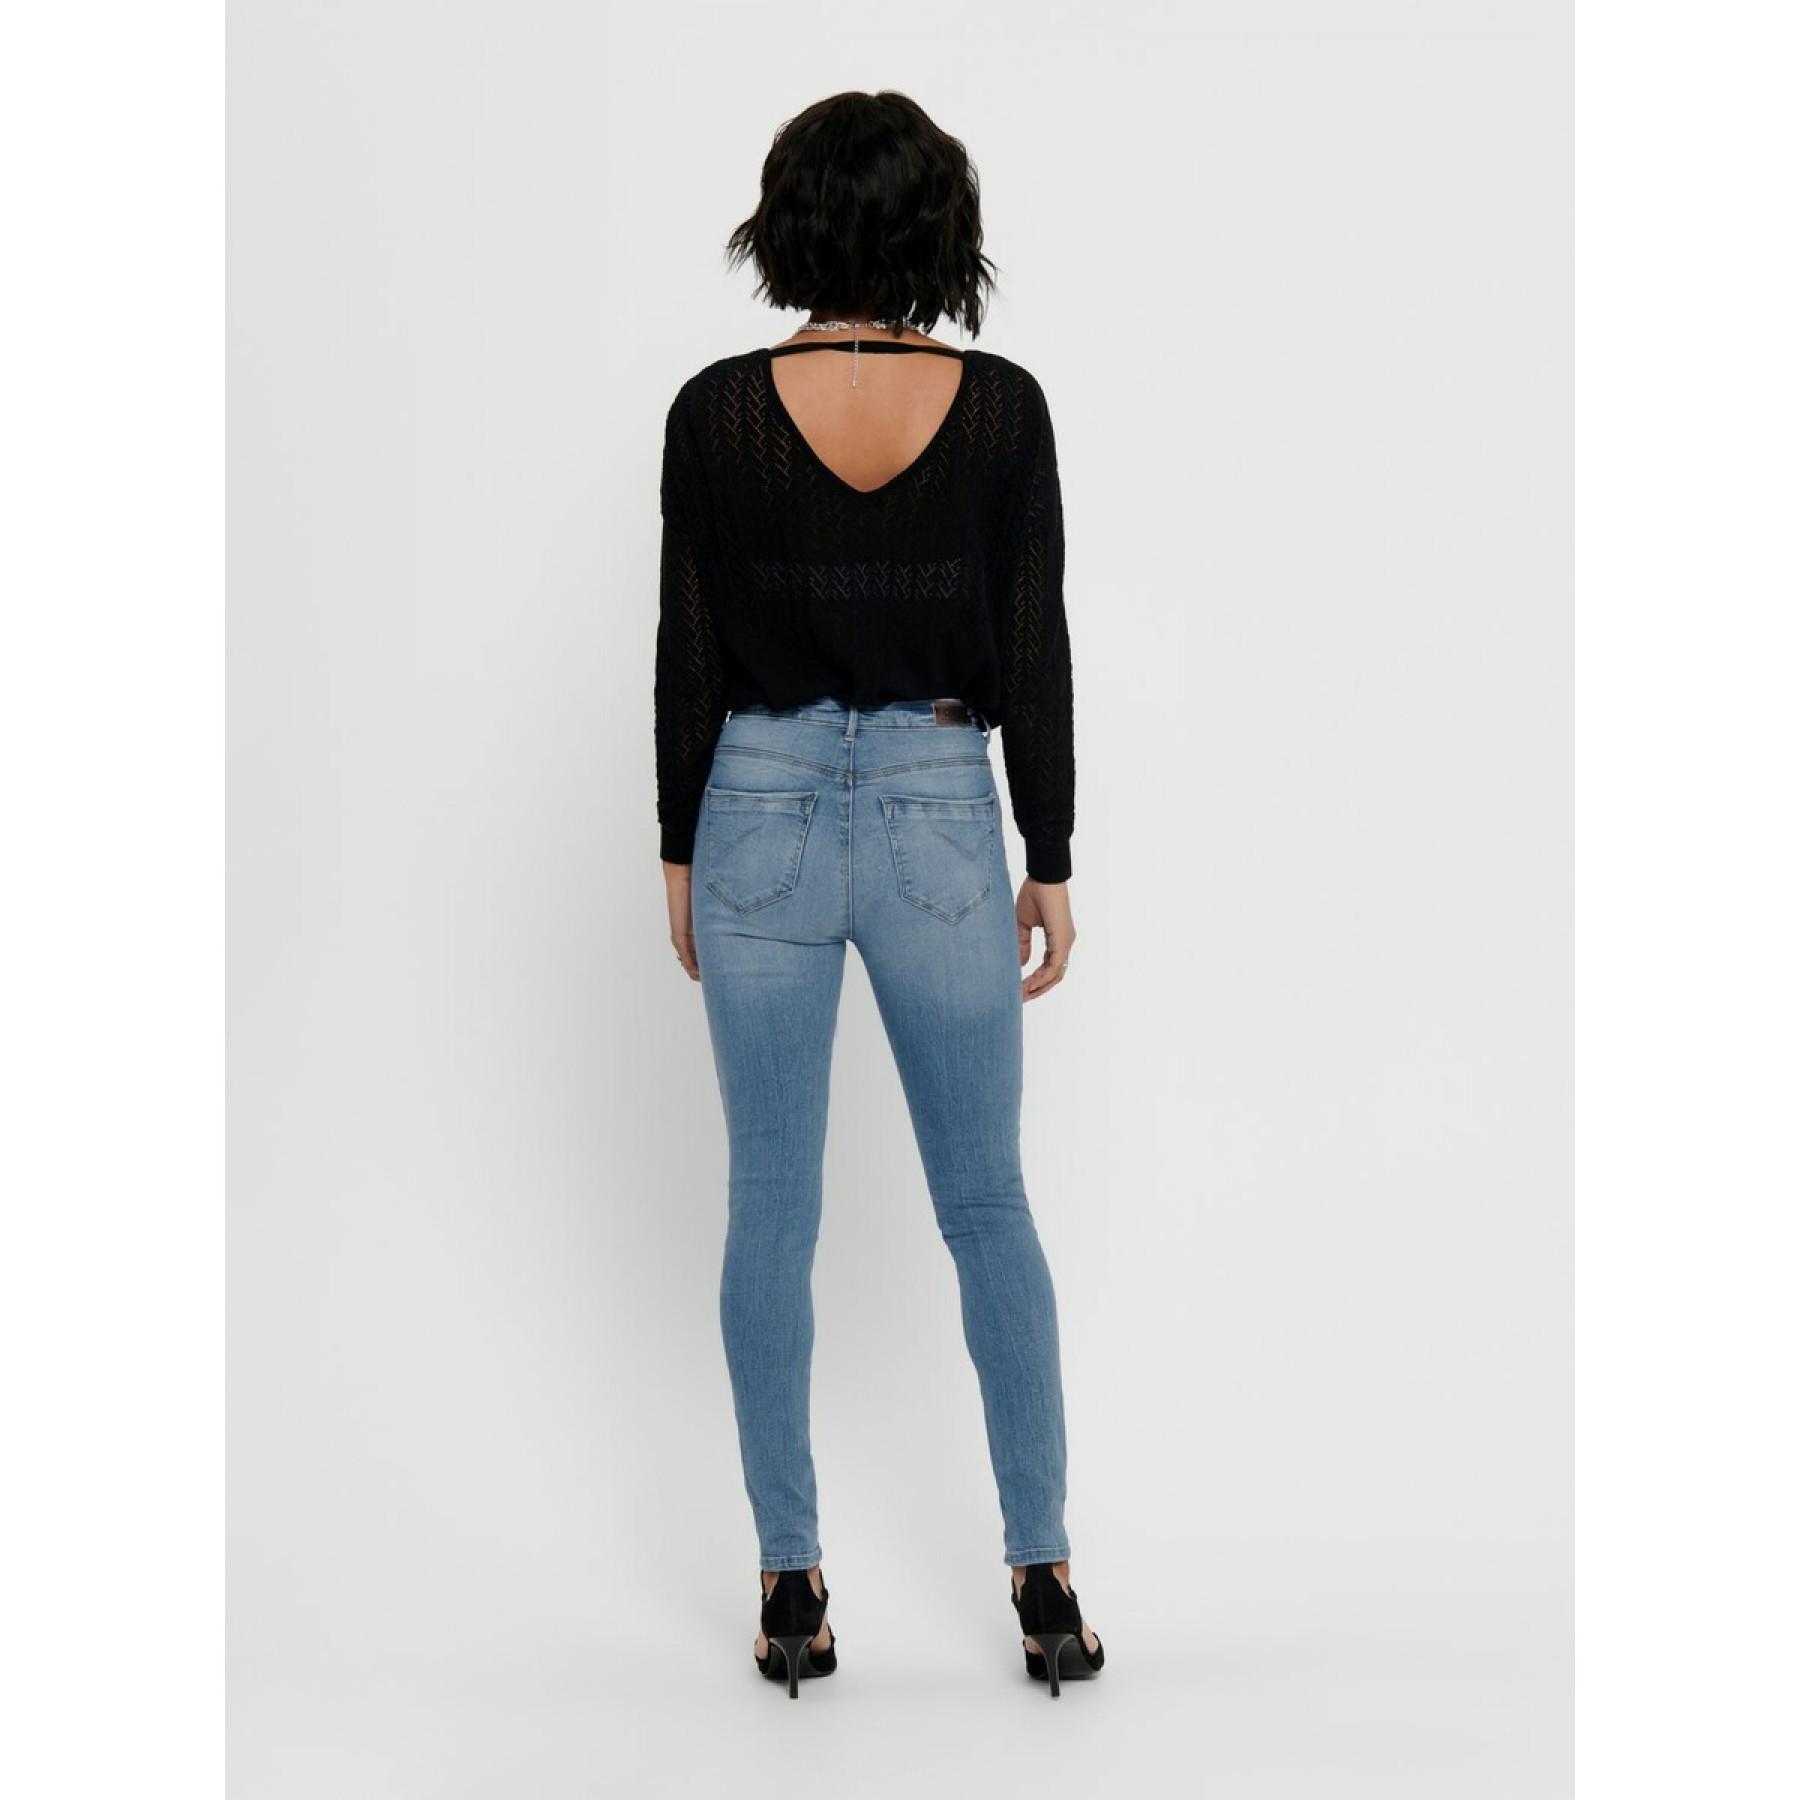 Women's jeans Only Paola life